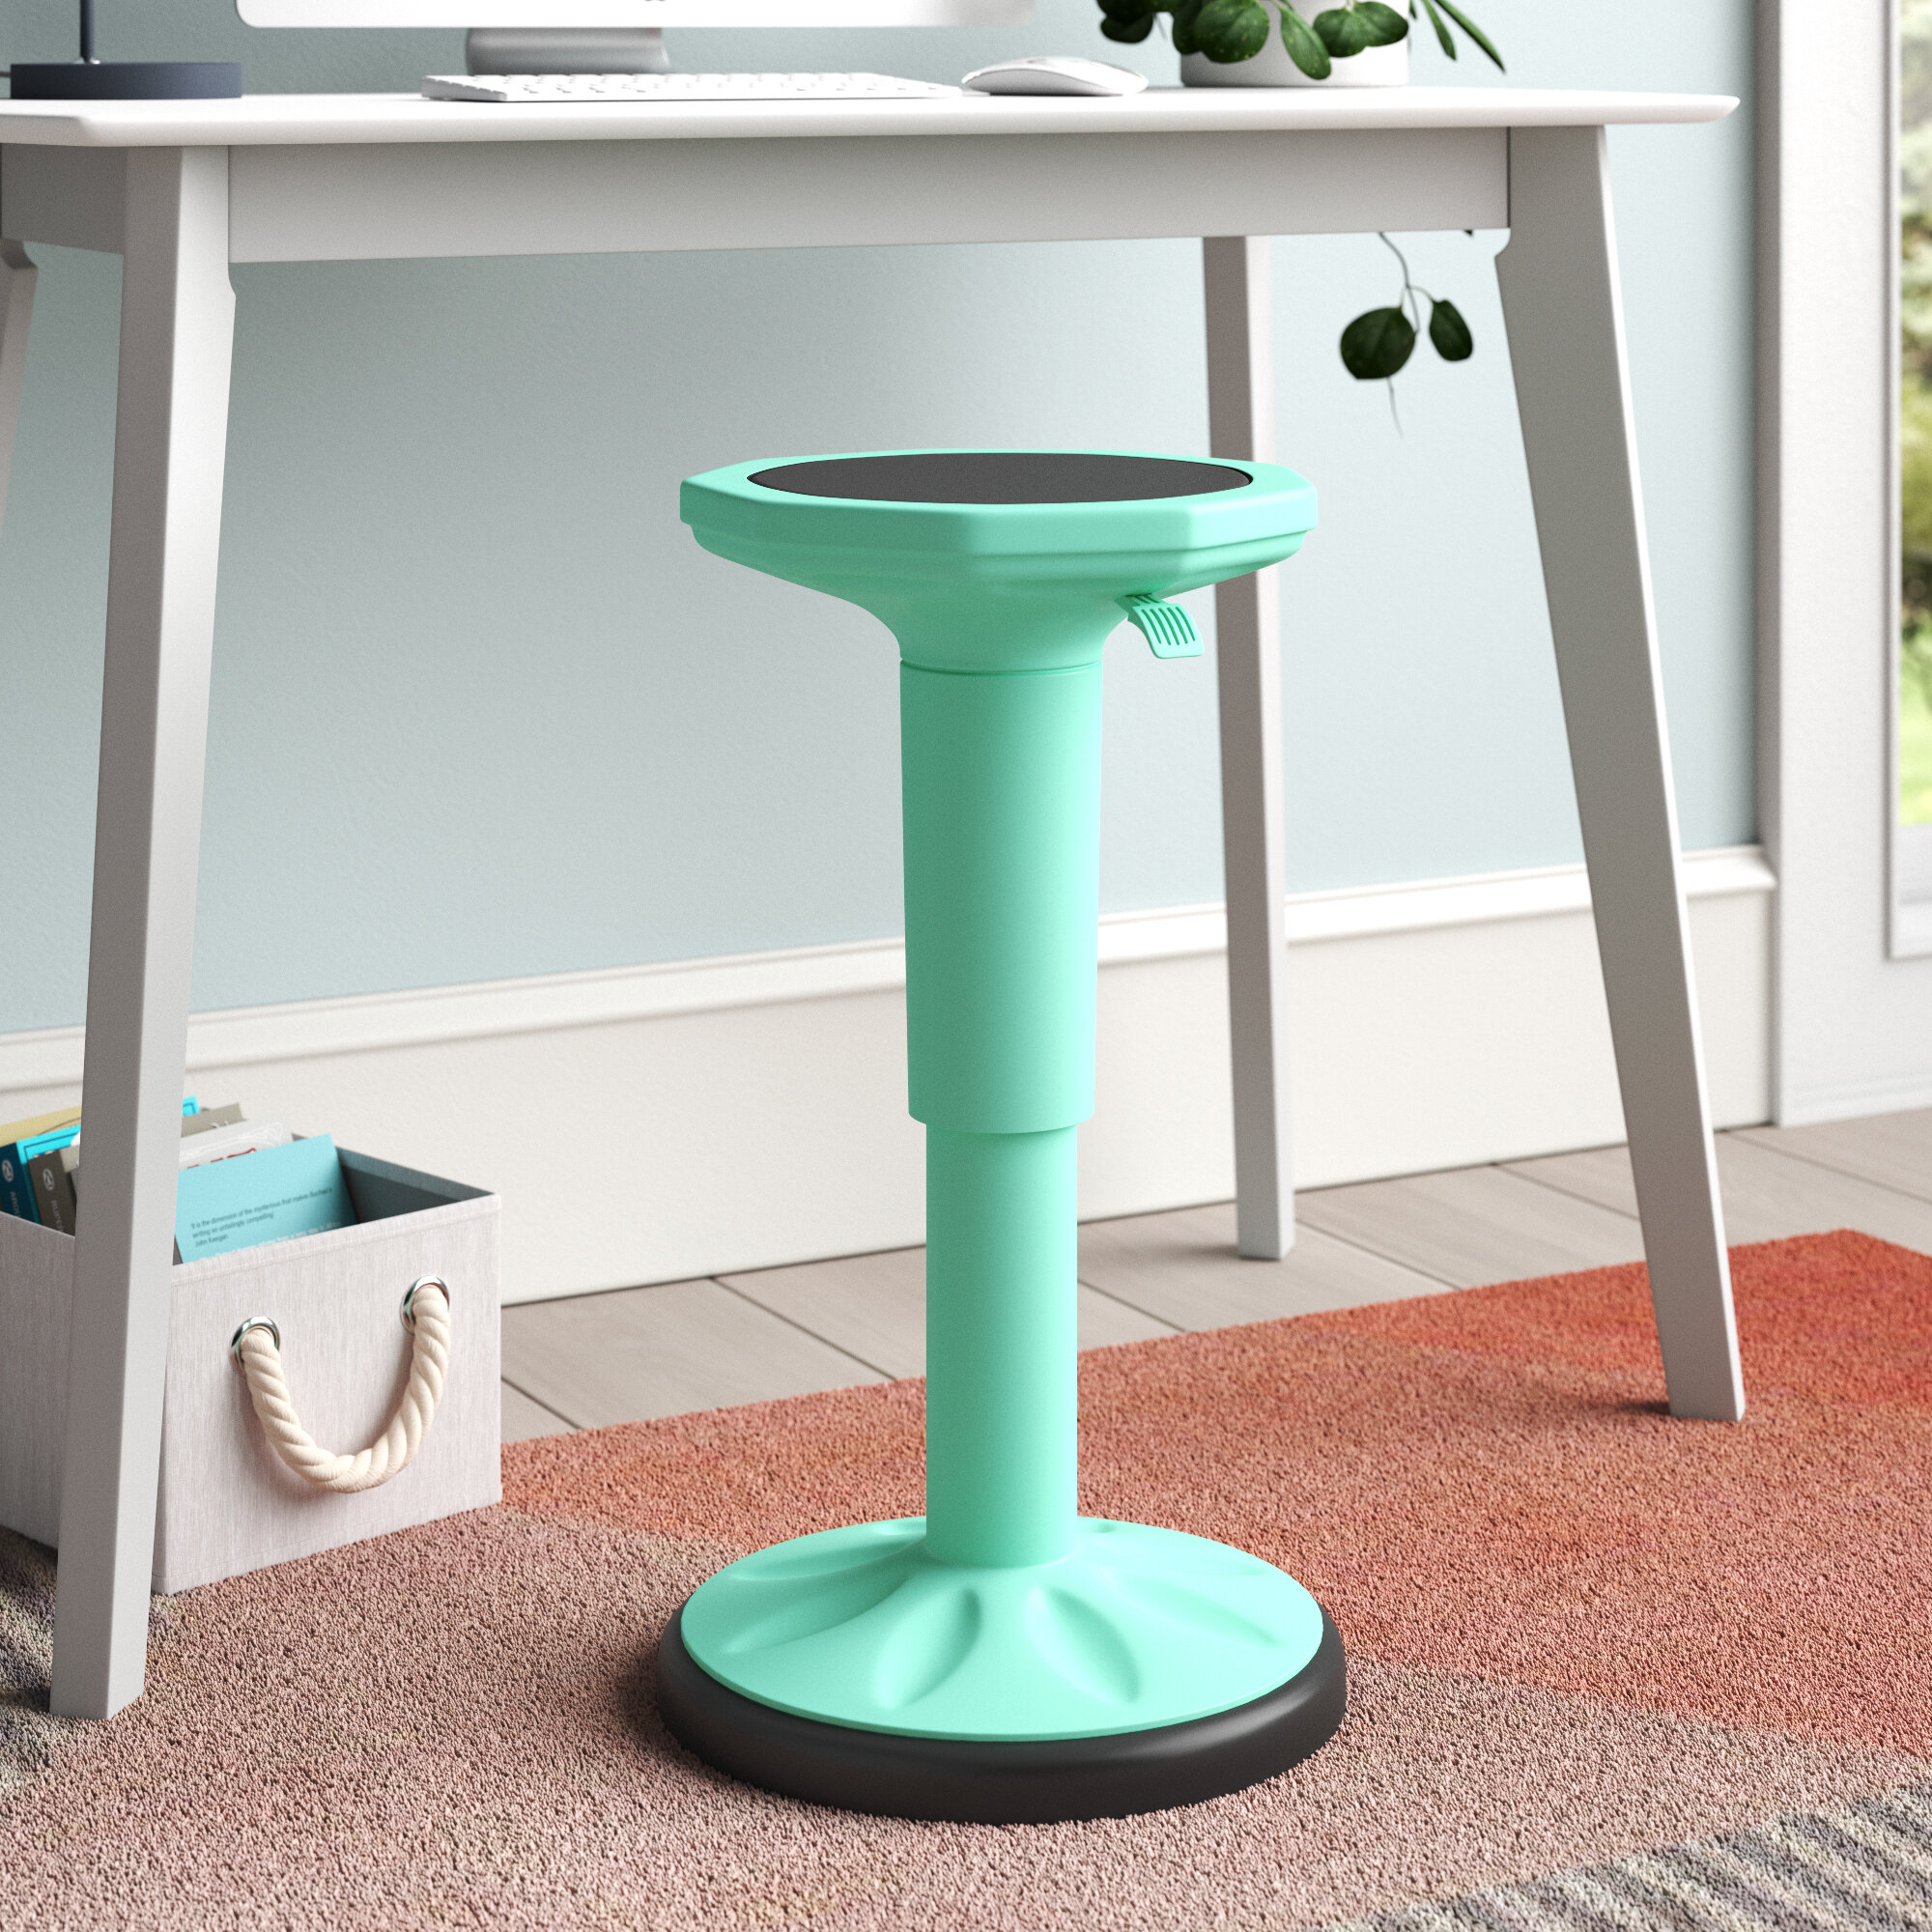 Adjustable-Height Wobble Chair Active Learning Stool for Office